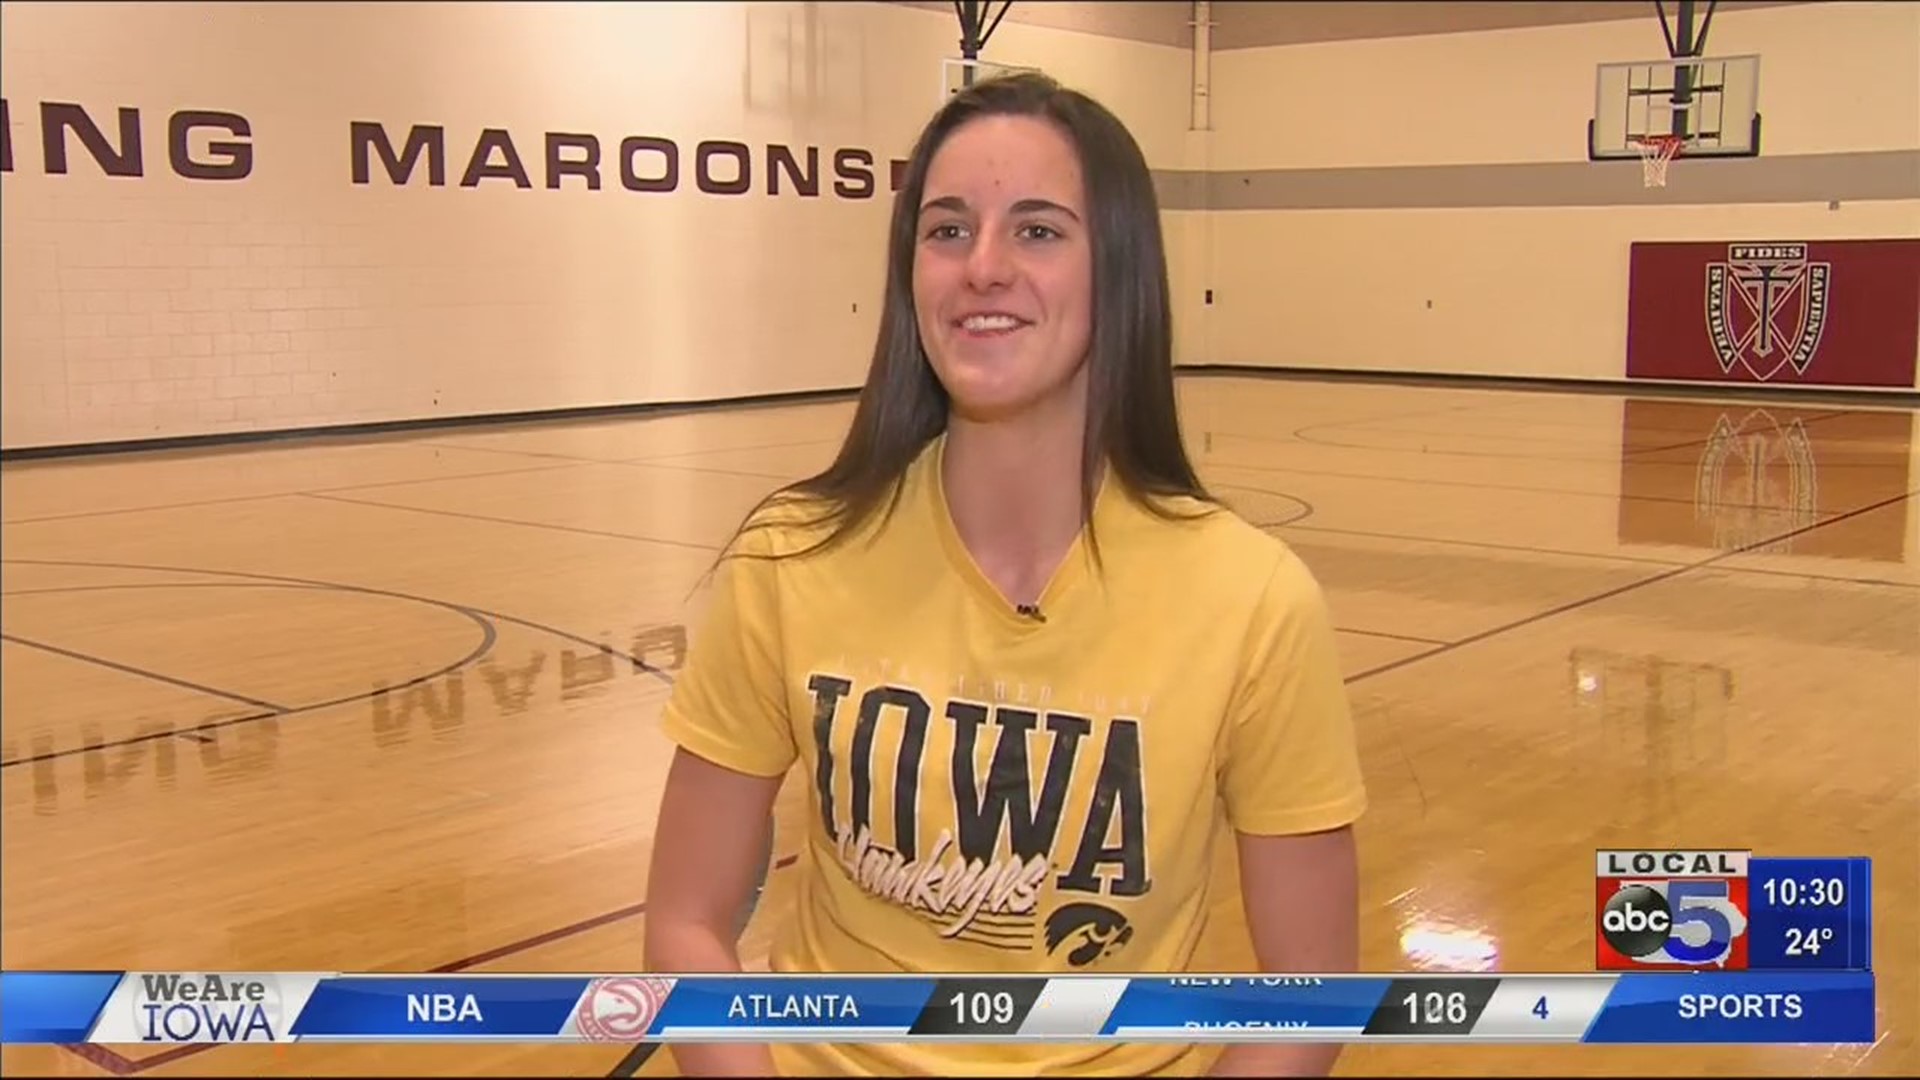 Caitlin Clark talked about the decision to go to Iowa over other big name schools. It boiled down to proximity to family, and wanting to do something never done before.